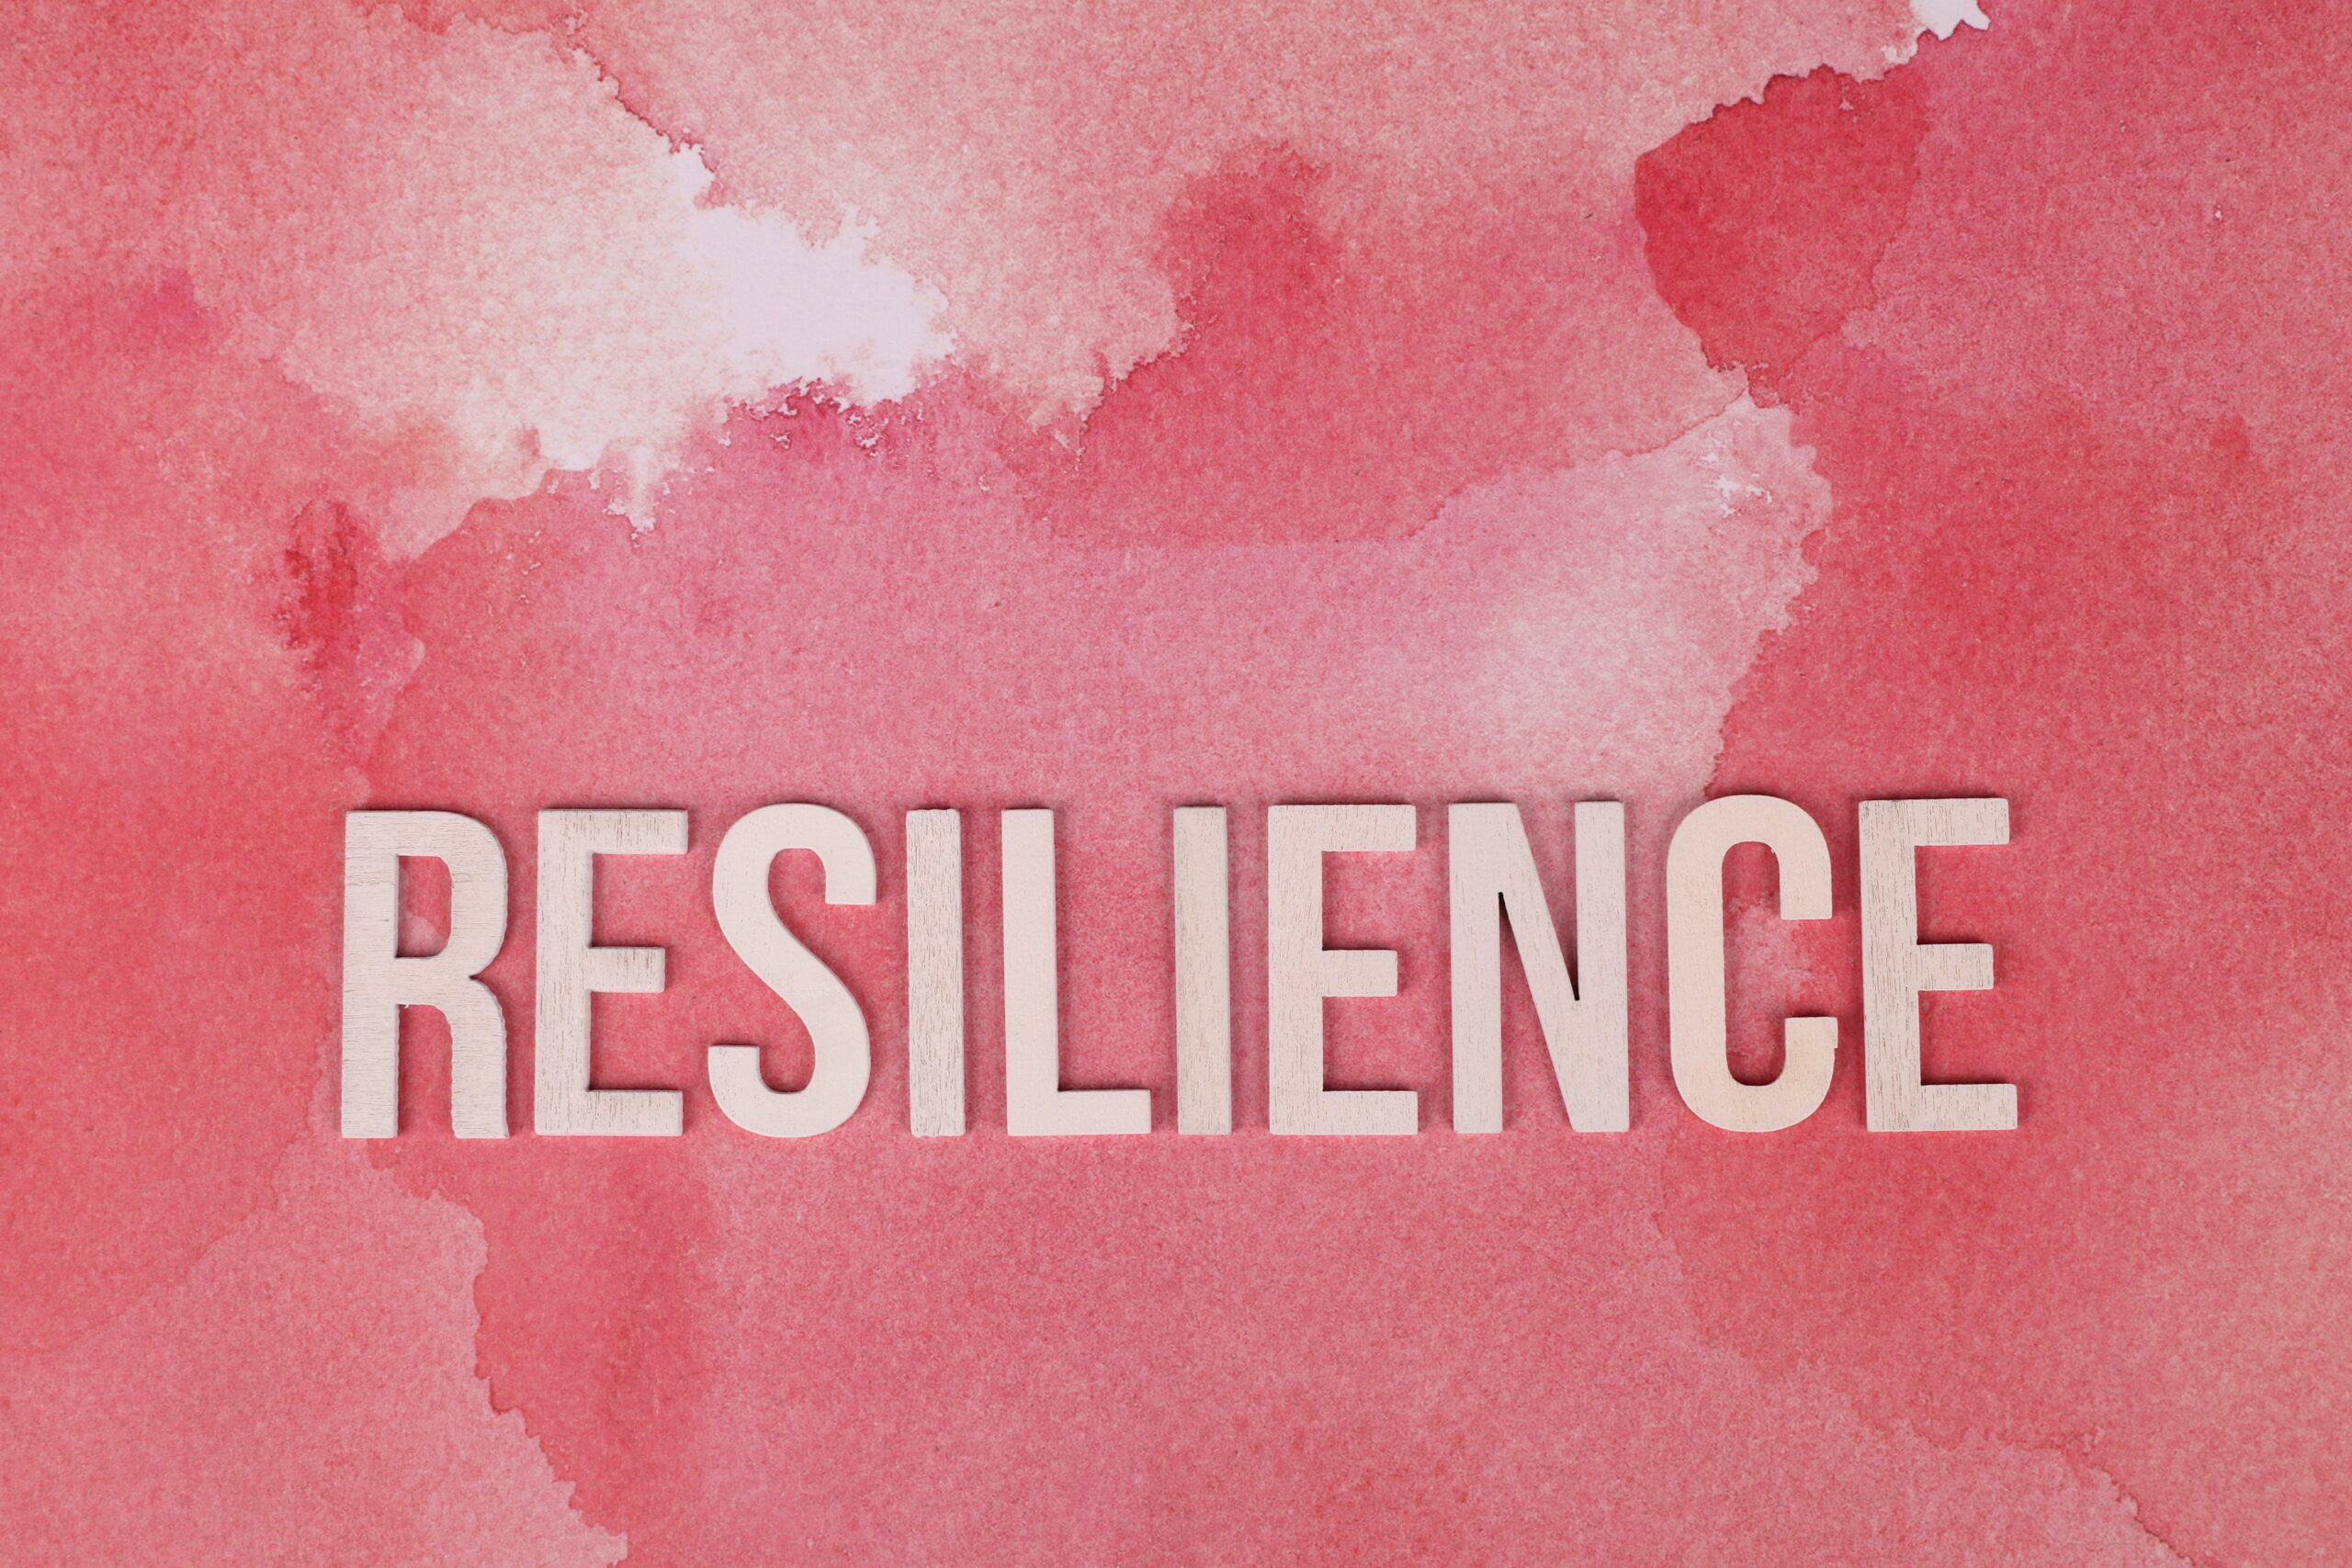 7 Ways To Build A Resilient Mindset To Overcome Adversity